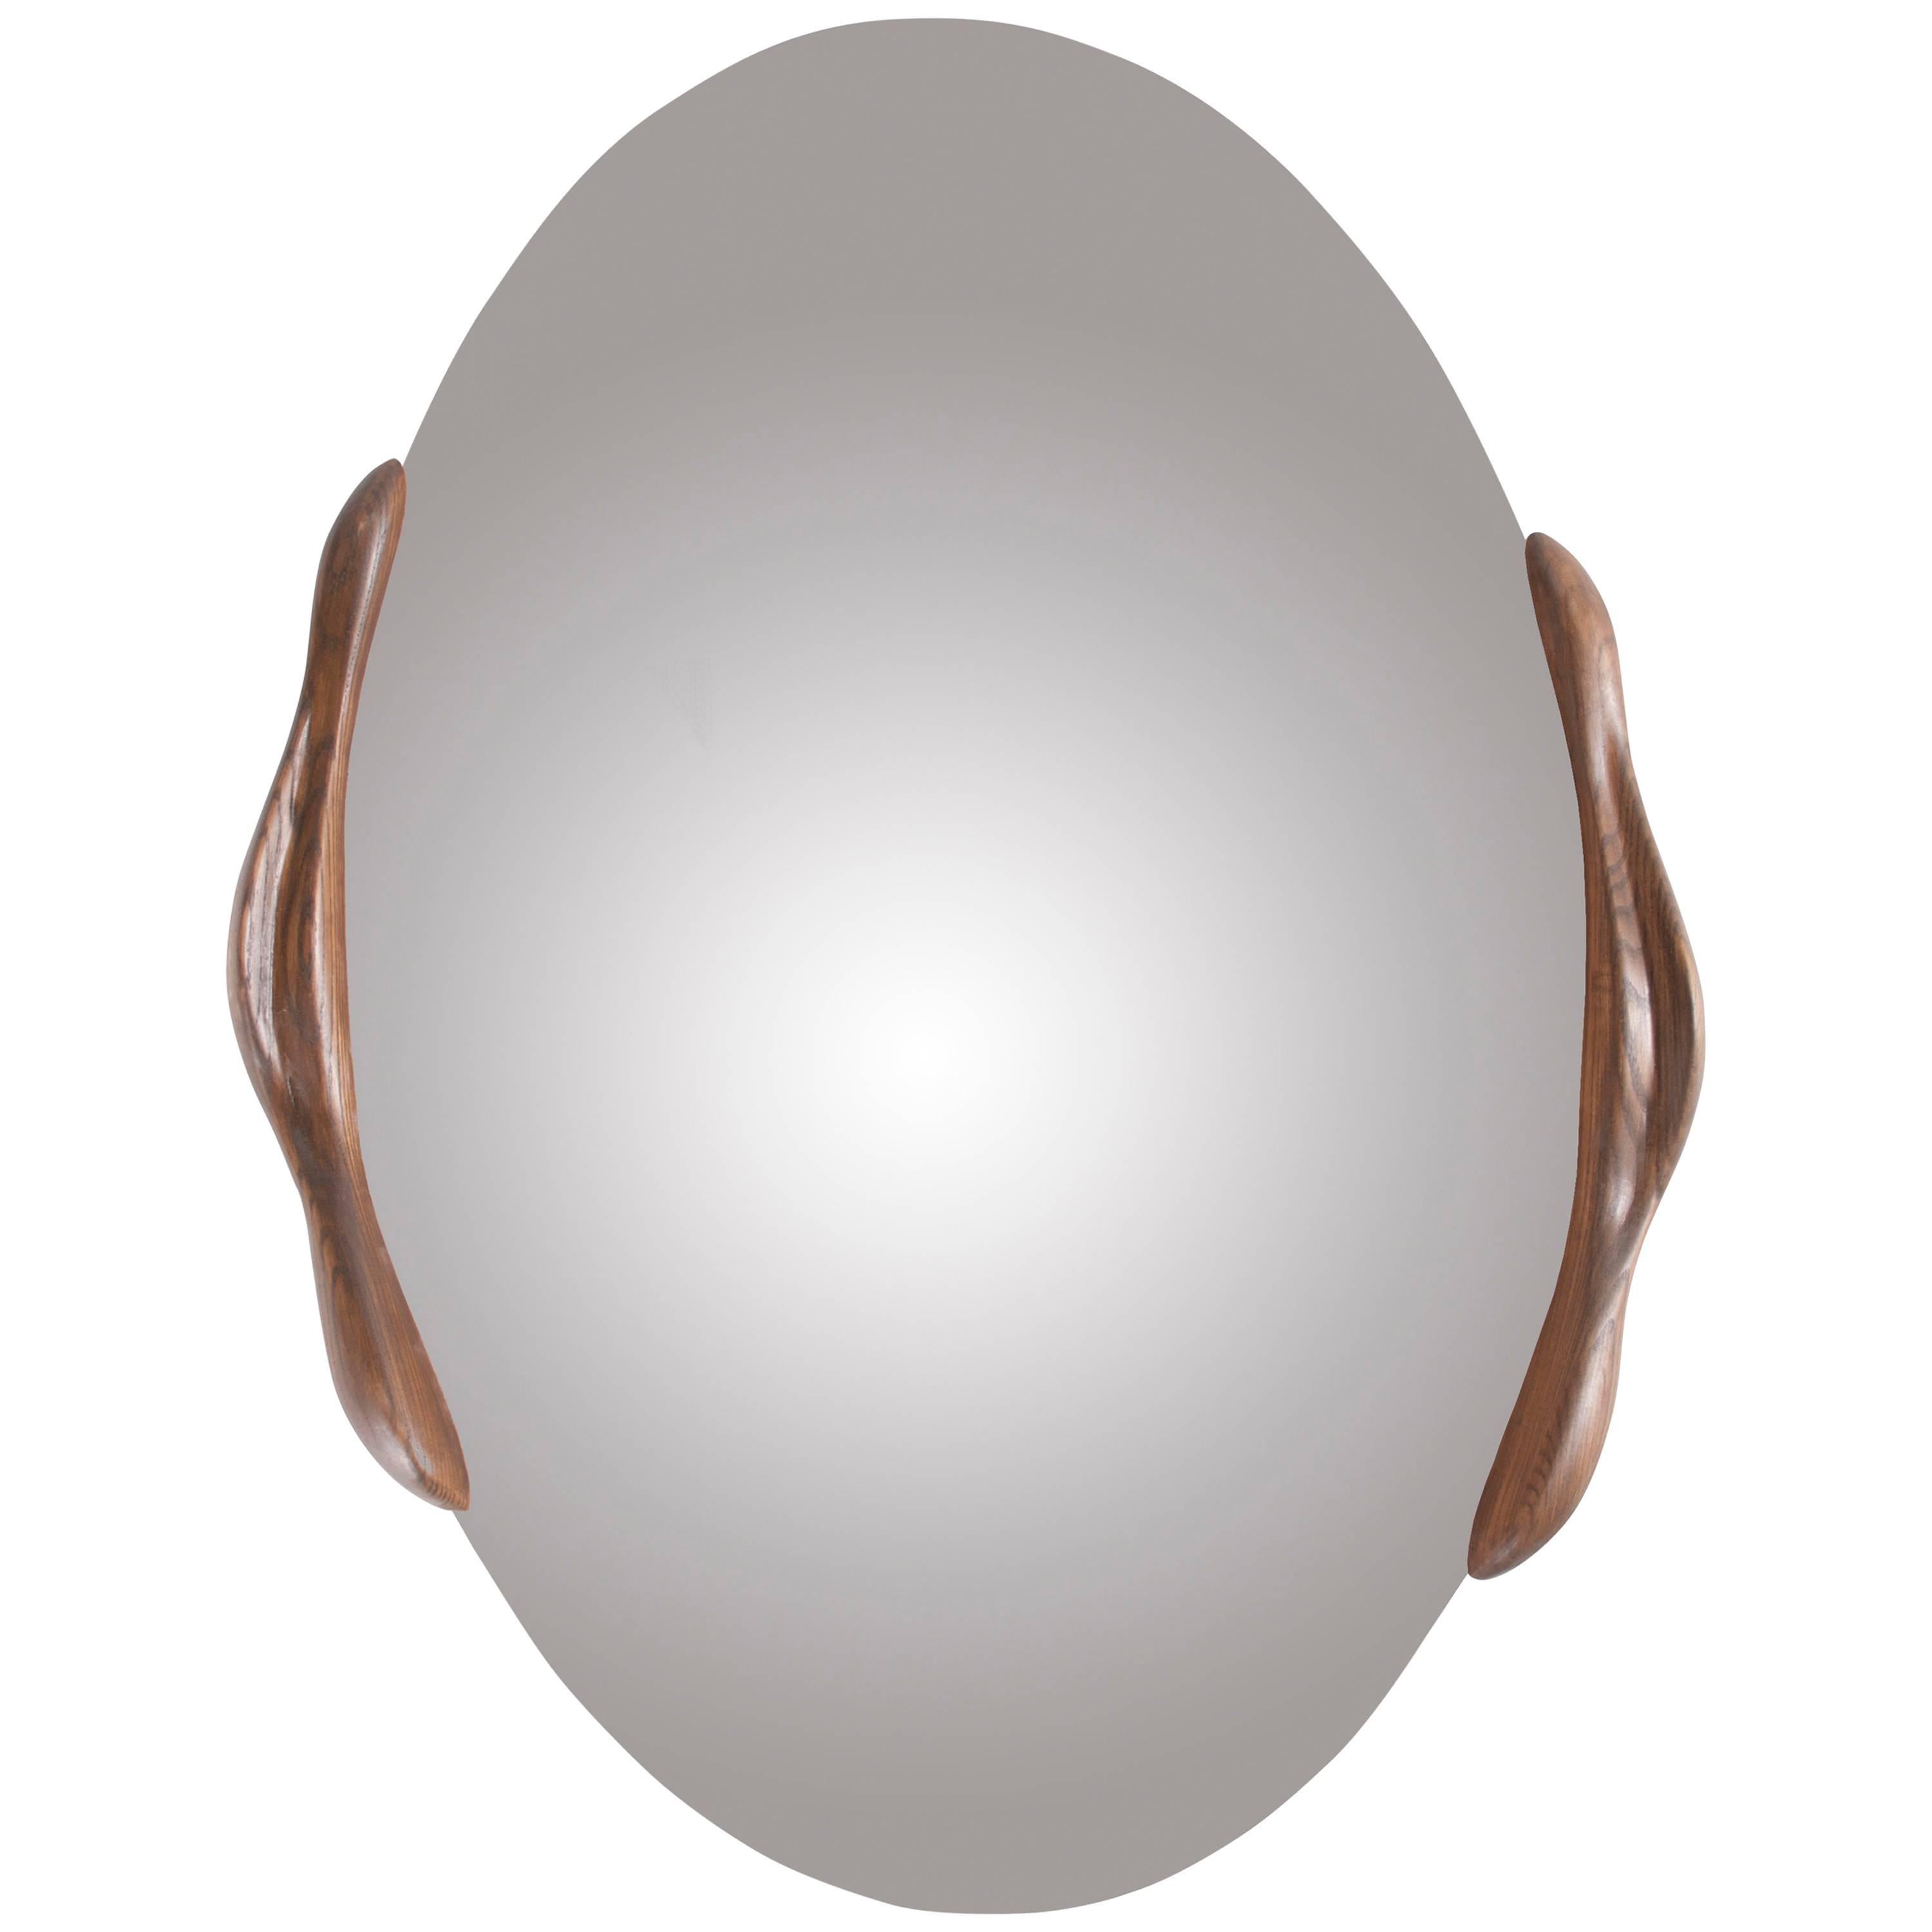 Amorph Oval Shaped Mirror in Walnut stain on Ash wood  For Sale